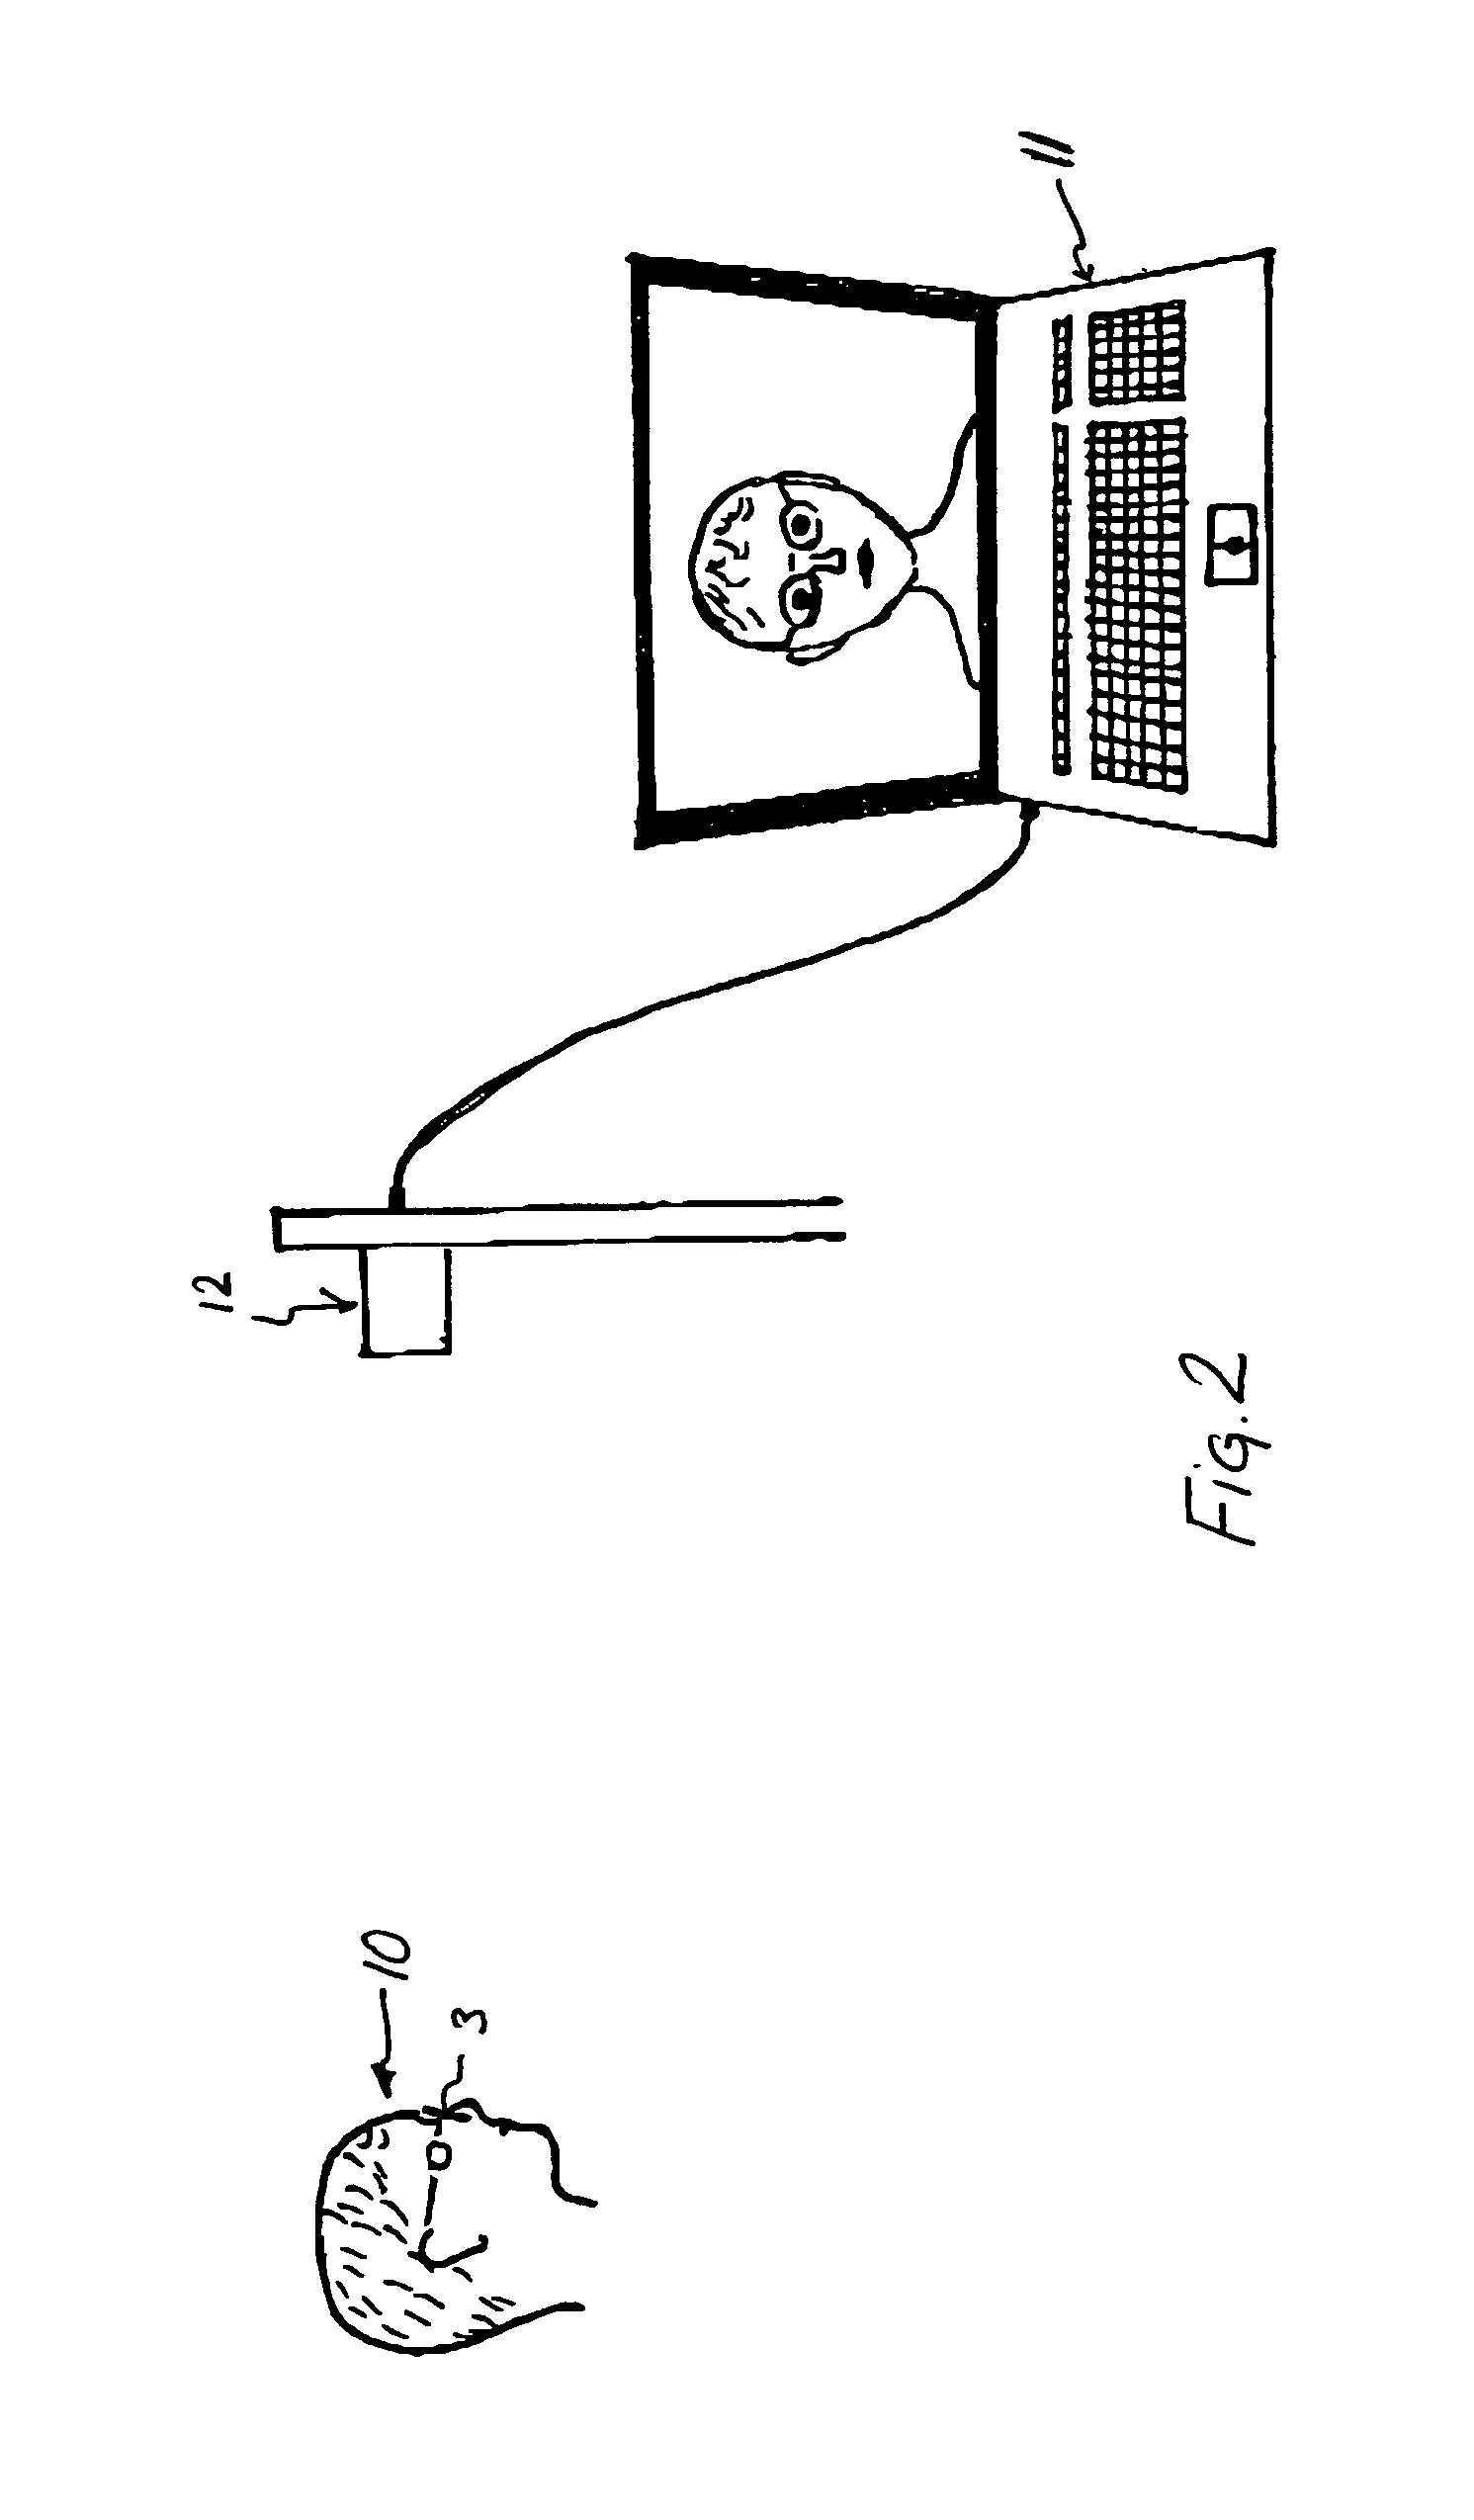 Method for simulating and demonstrating the optical effects of glasses on the human face